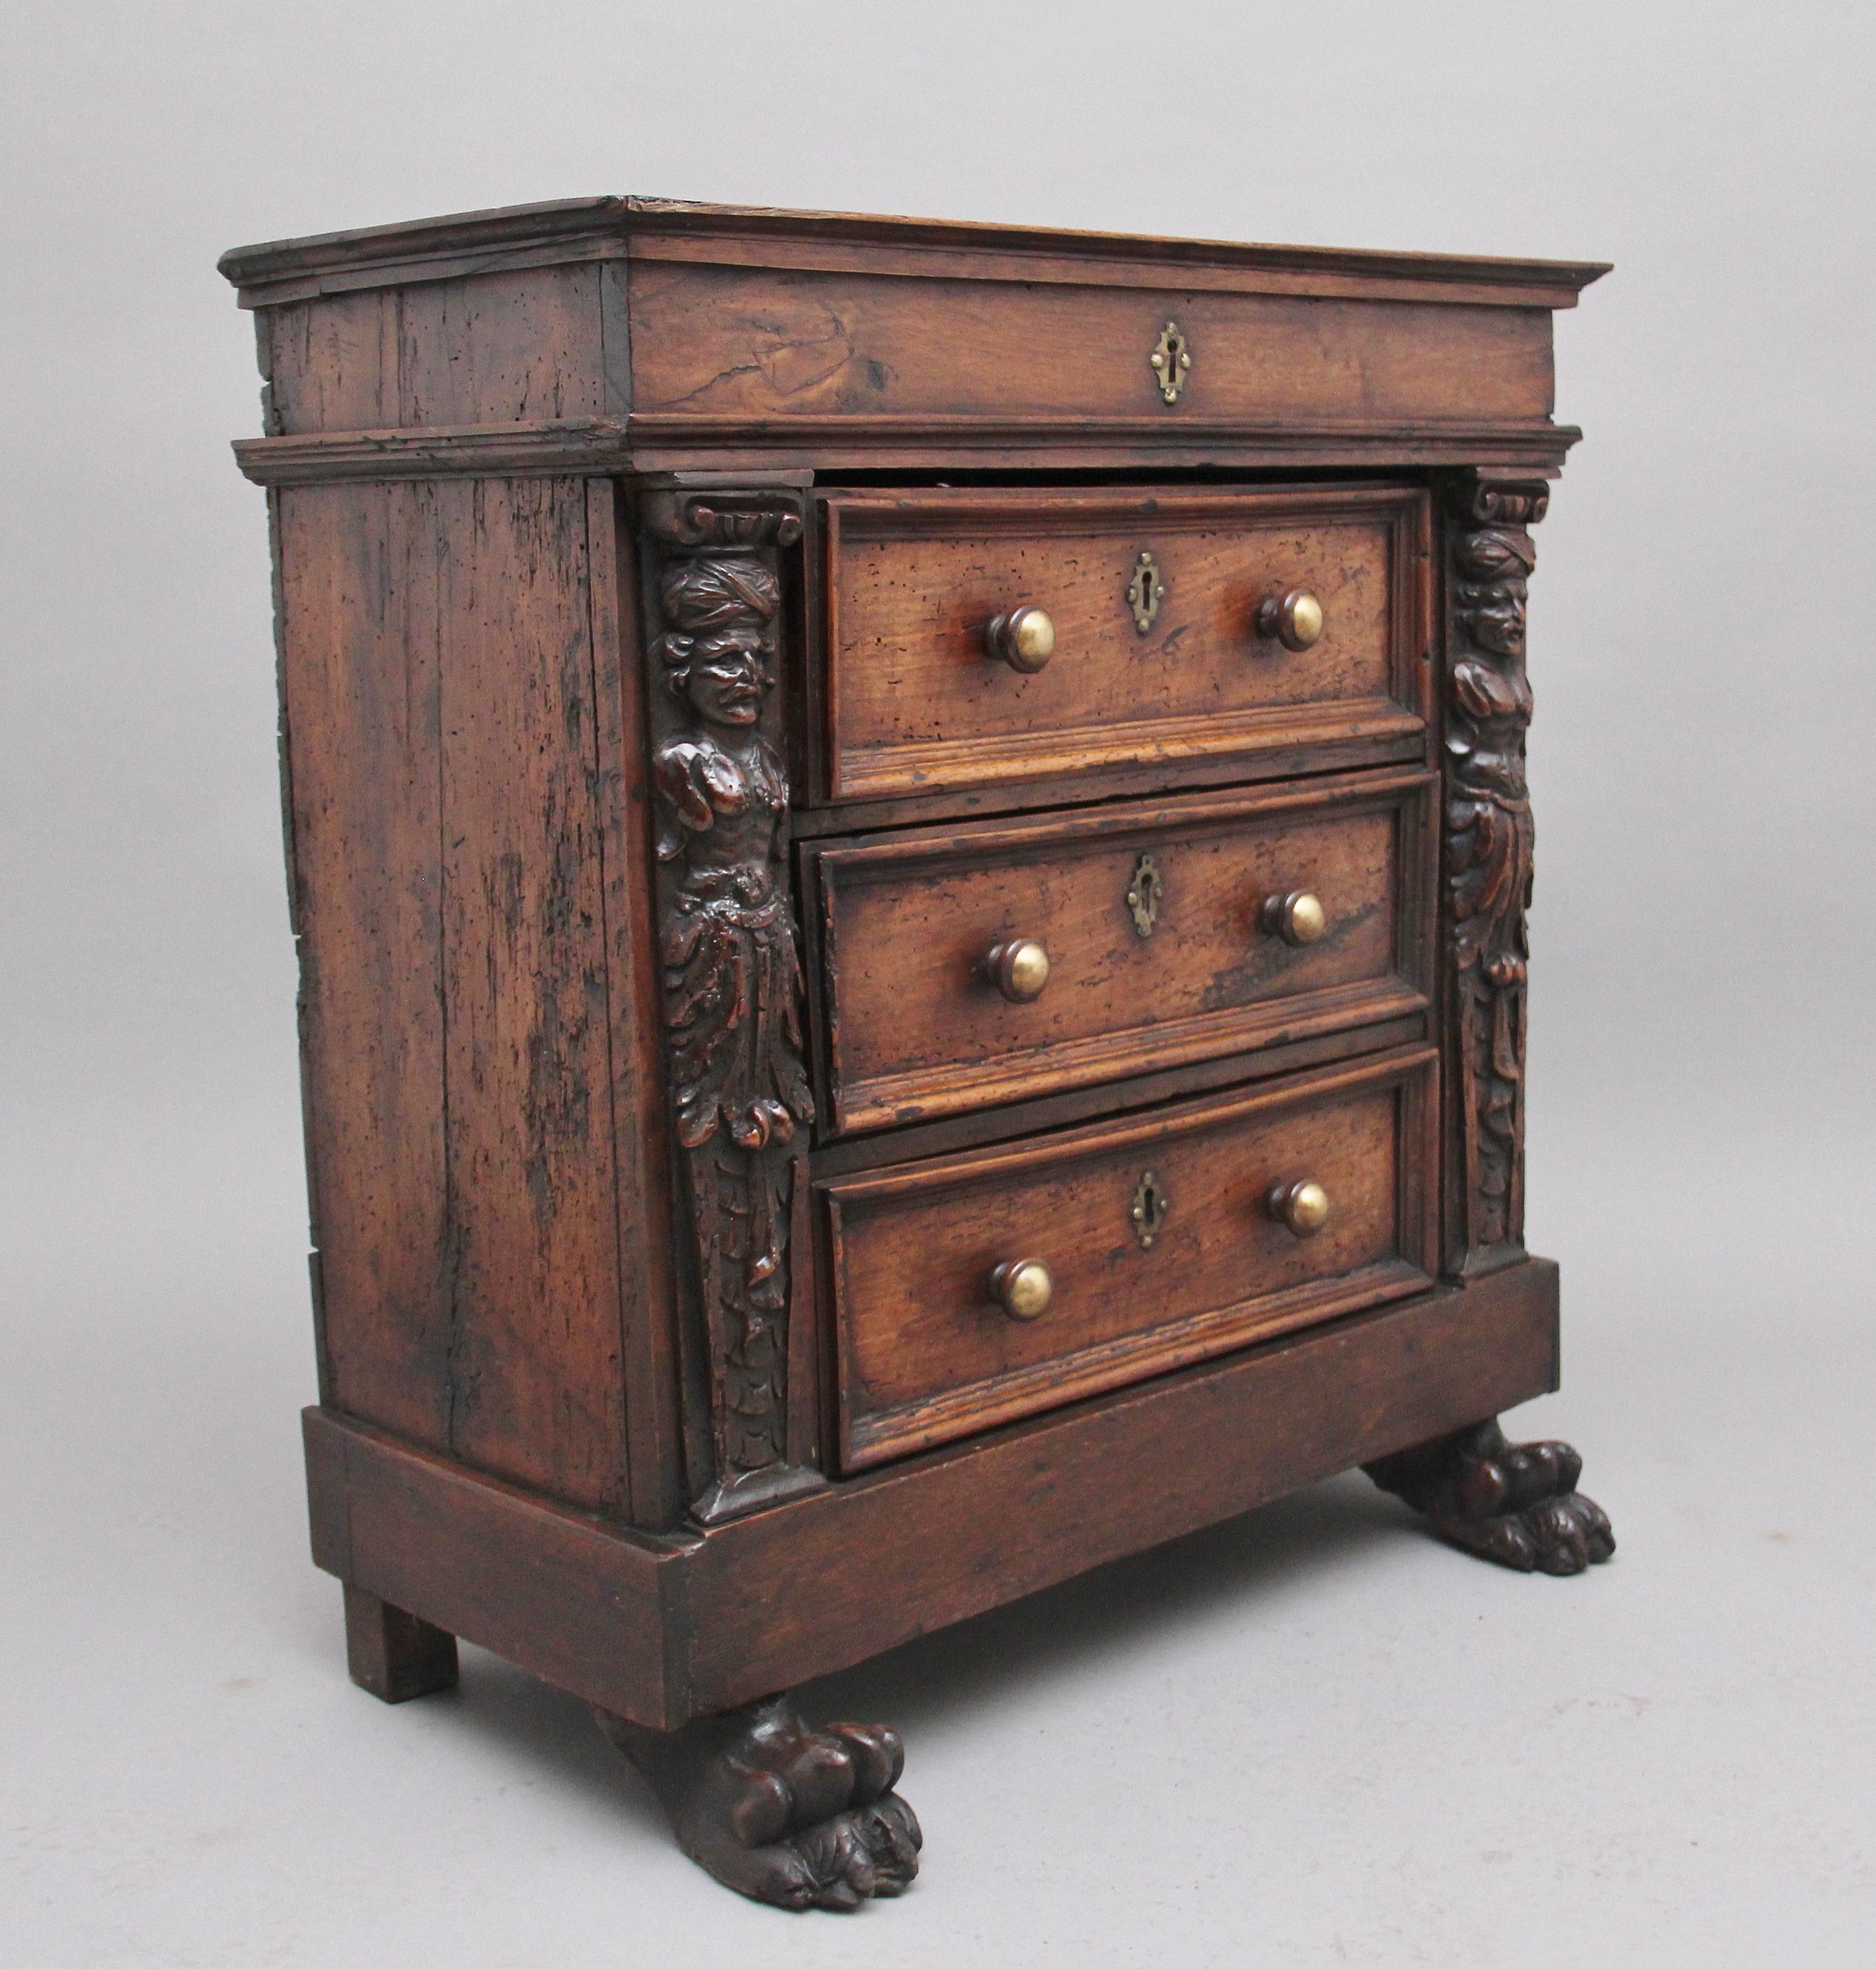 An unusual and rare 17th century Italian walnut chest, the top having a hinged lift up top to reveal a spacious compartment, three drawers below with moulded edges and original brass knob handles and escutcheons, the drawers flanked either side with